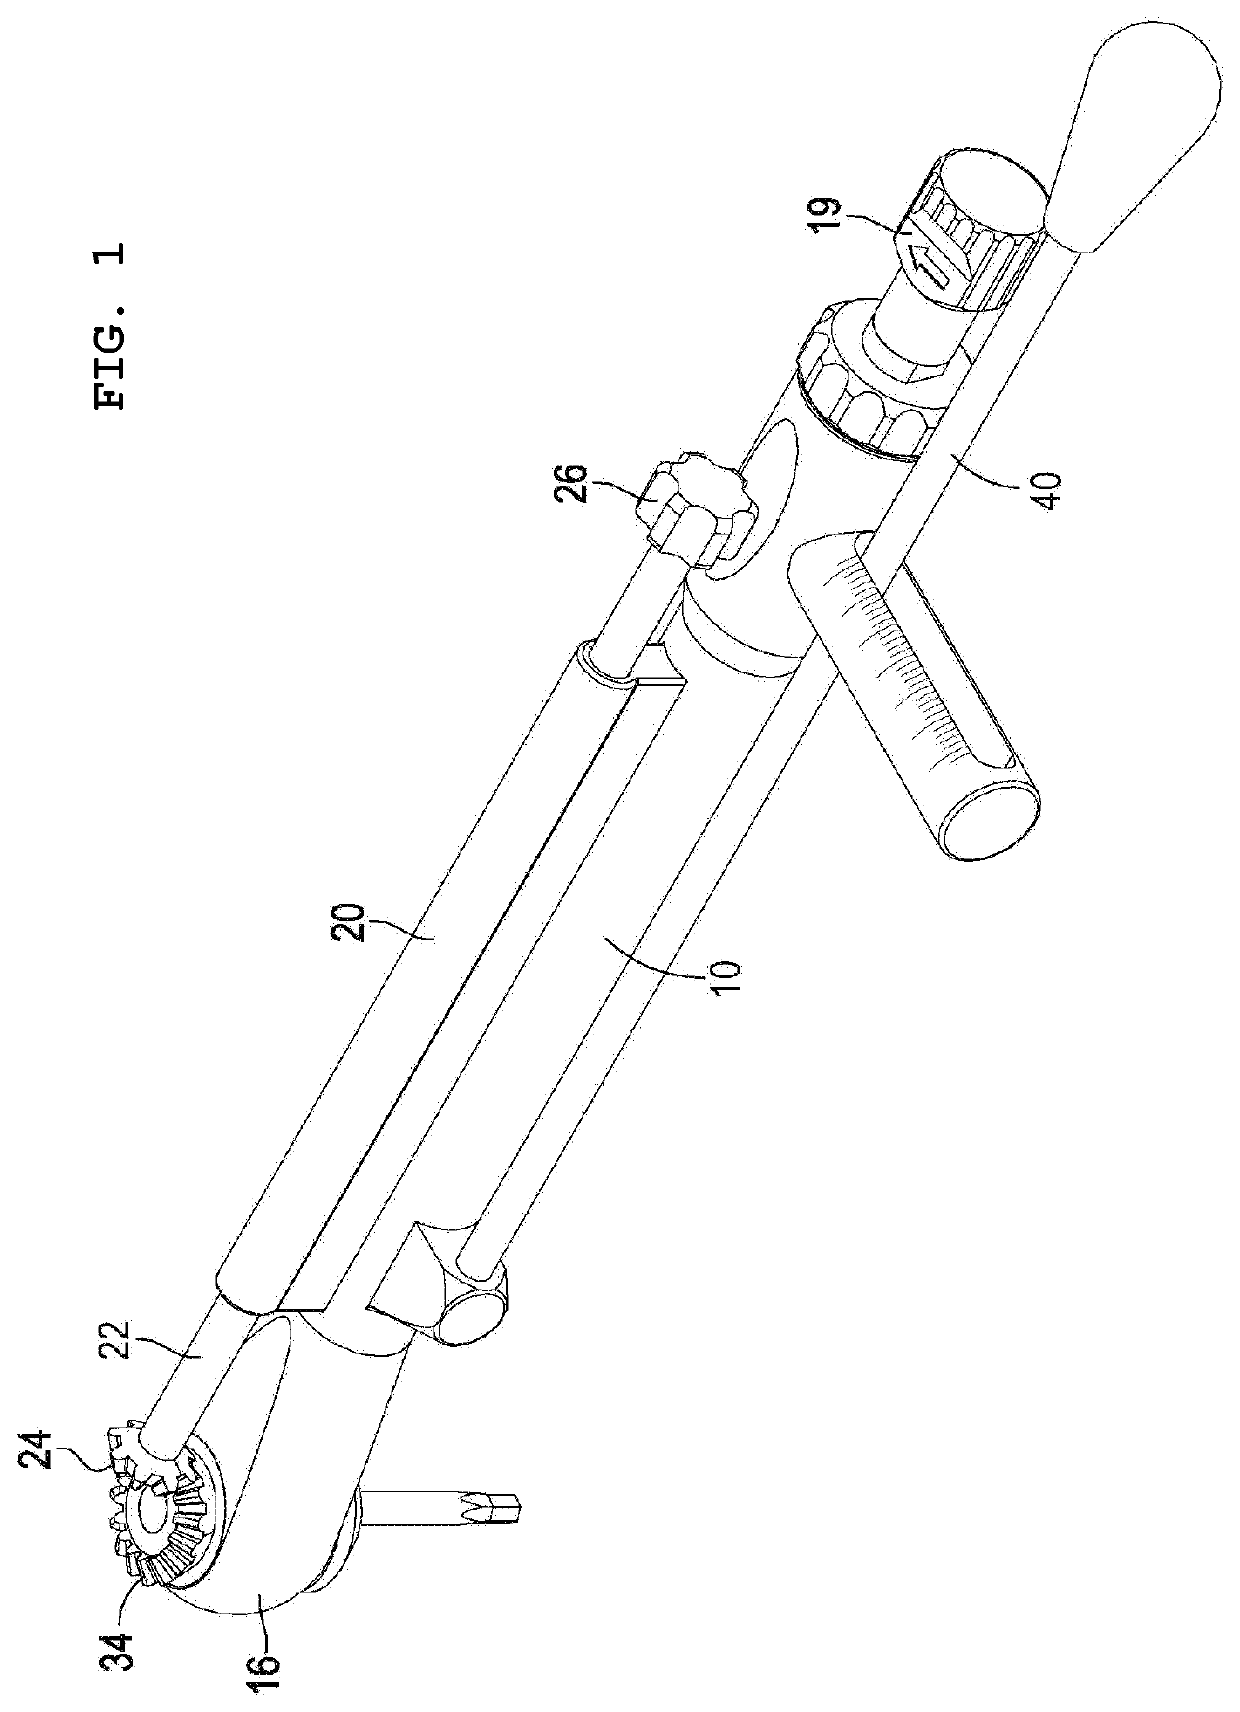 Torque Wrench for Implant Procedure